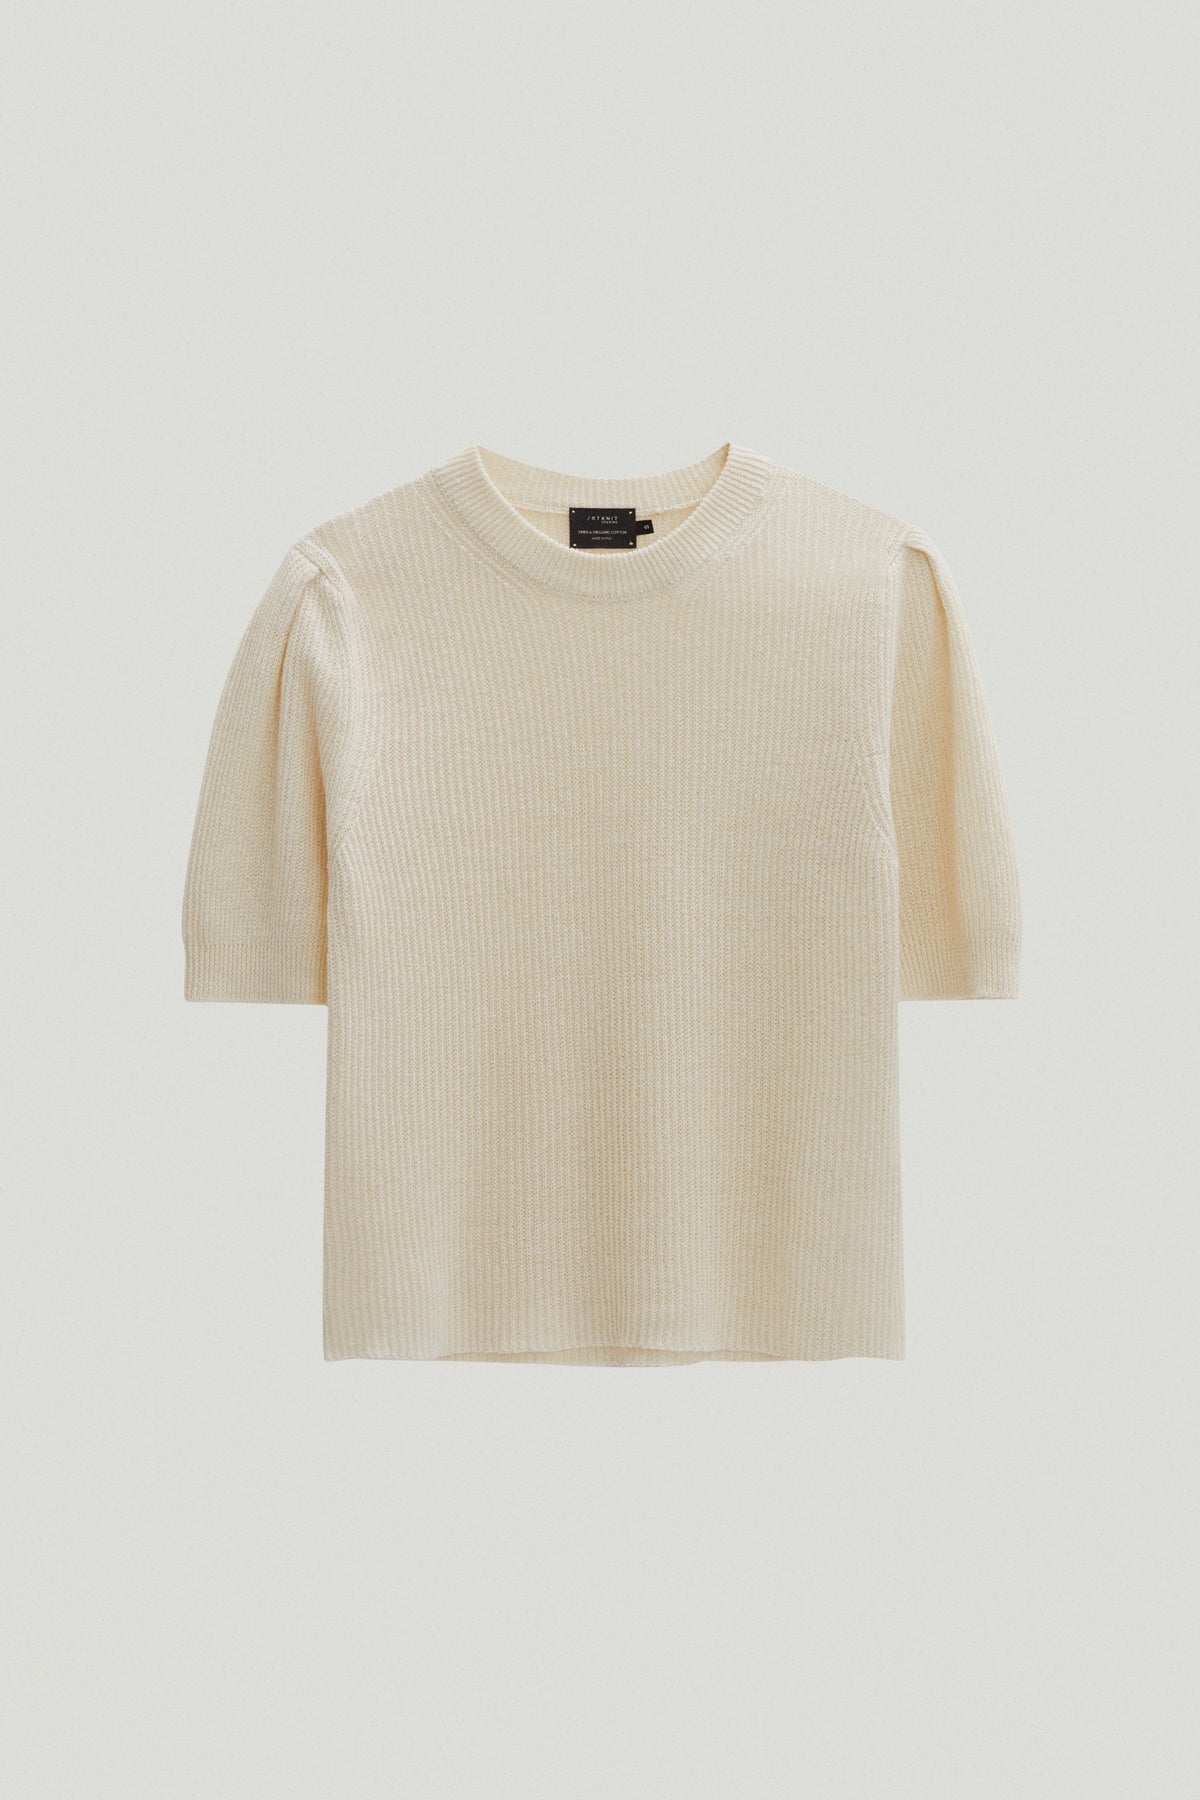 the linen cotton ribbed t shirt with pinces milk white